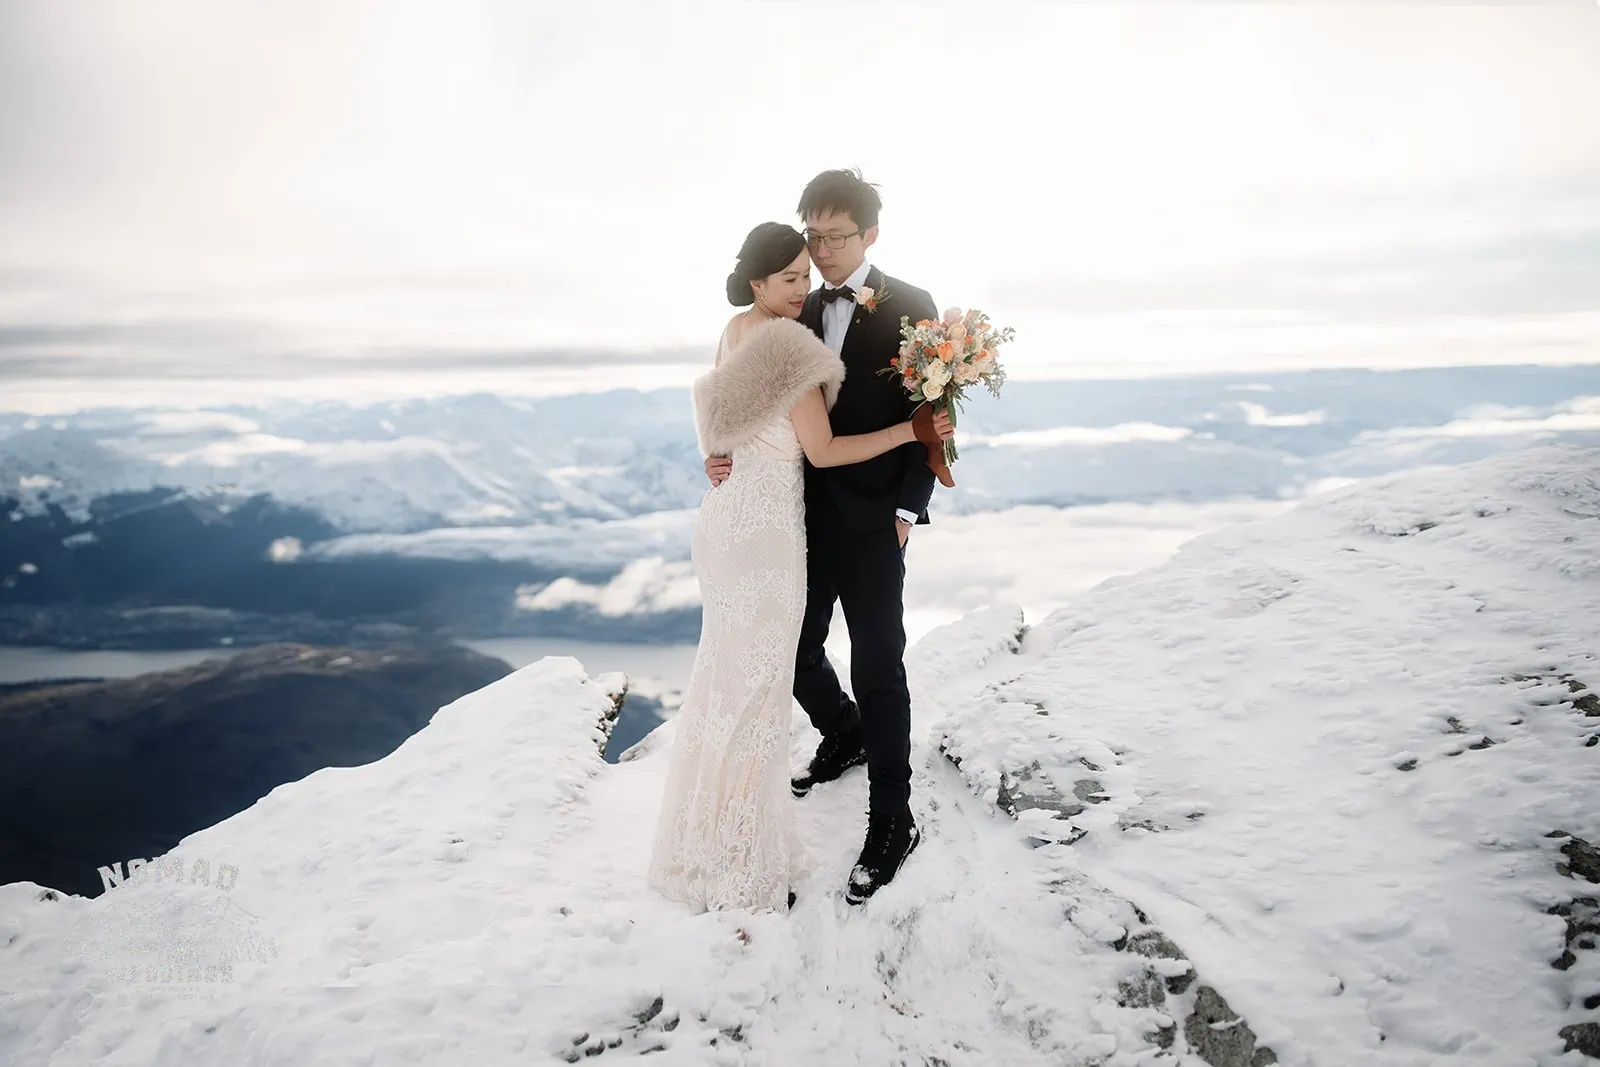 Joanna and Tony, a bride and groom, posing for their pre-wedding shoot on top of a snow-covered mountain in Queenstown, New Zealand.